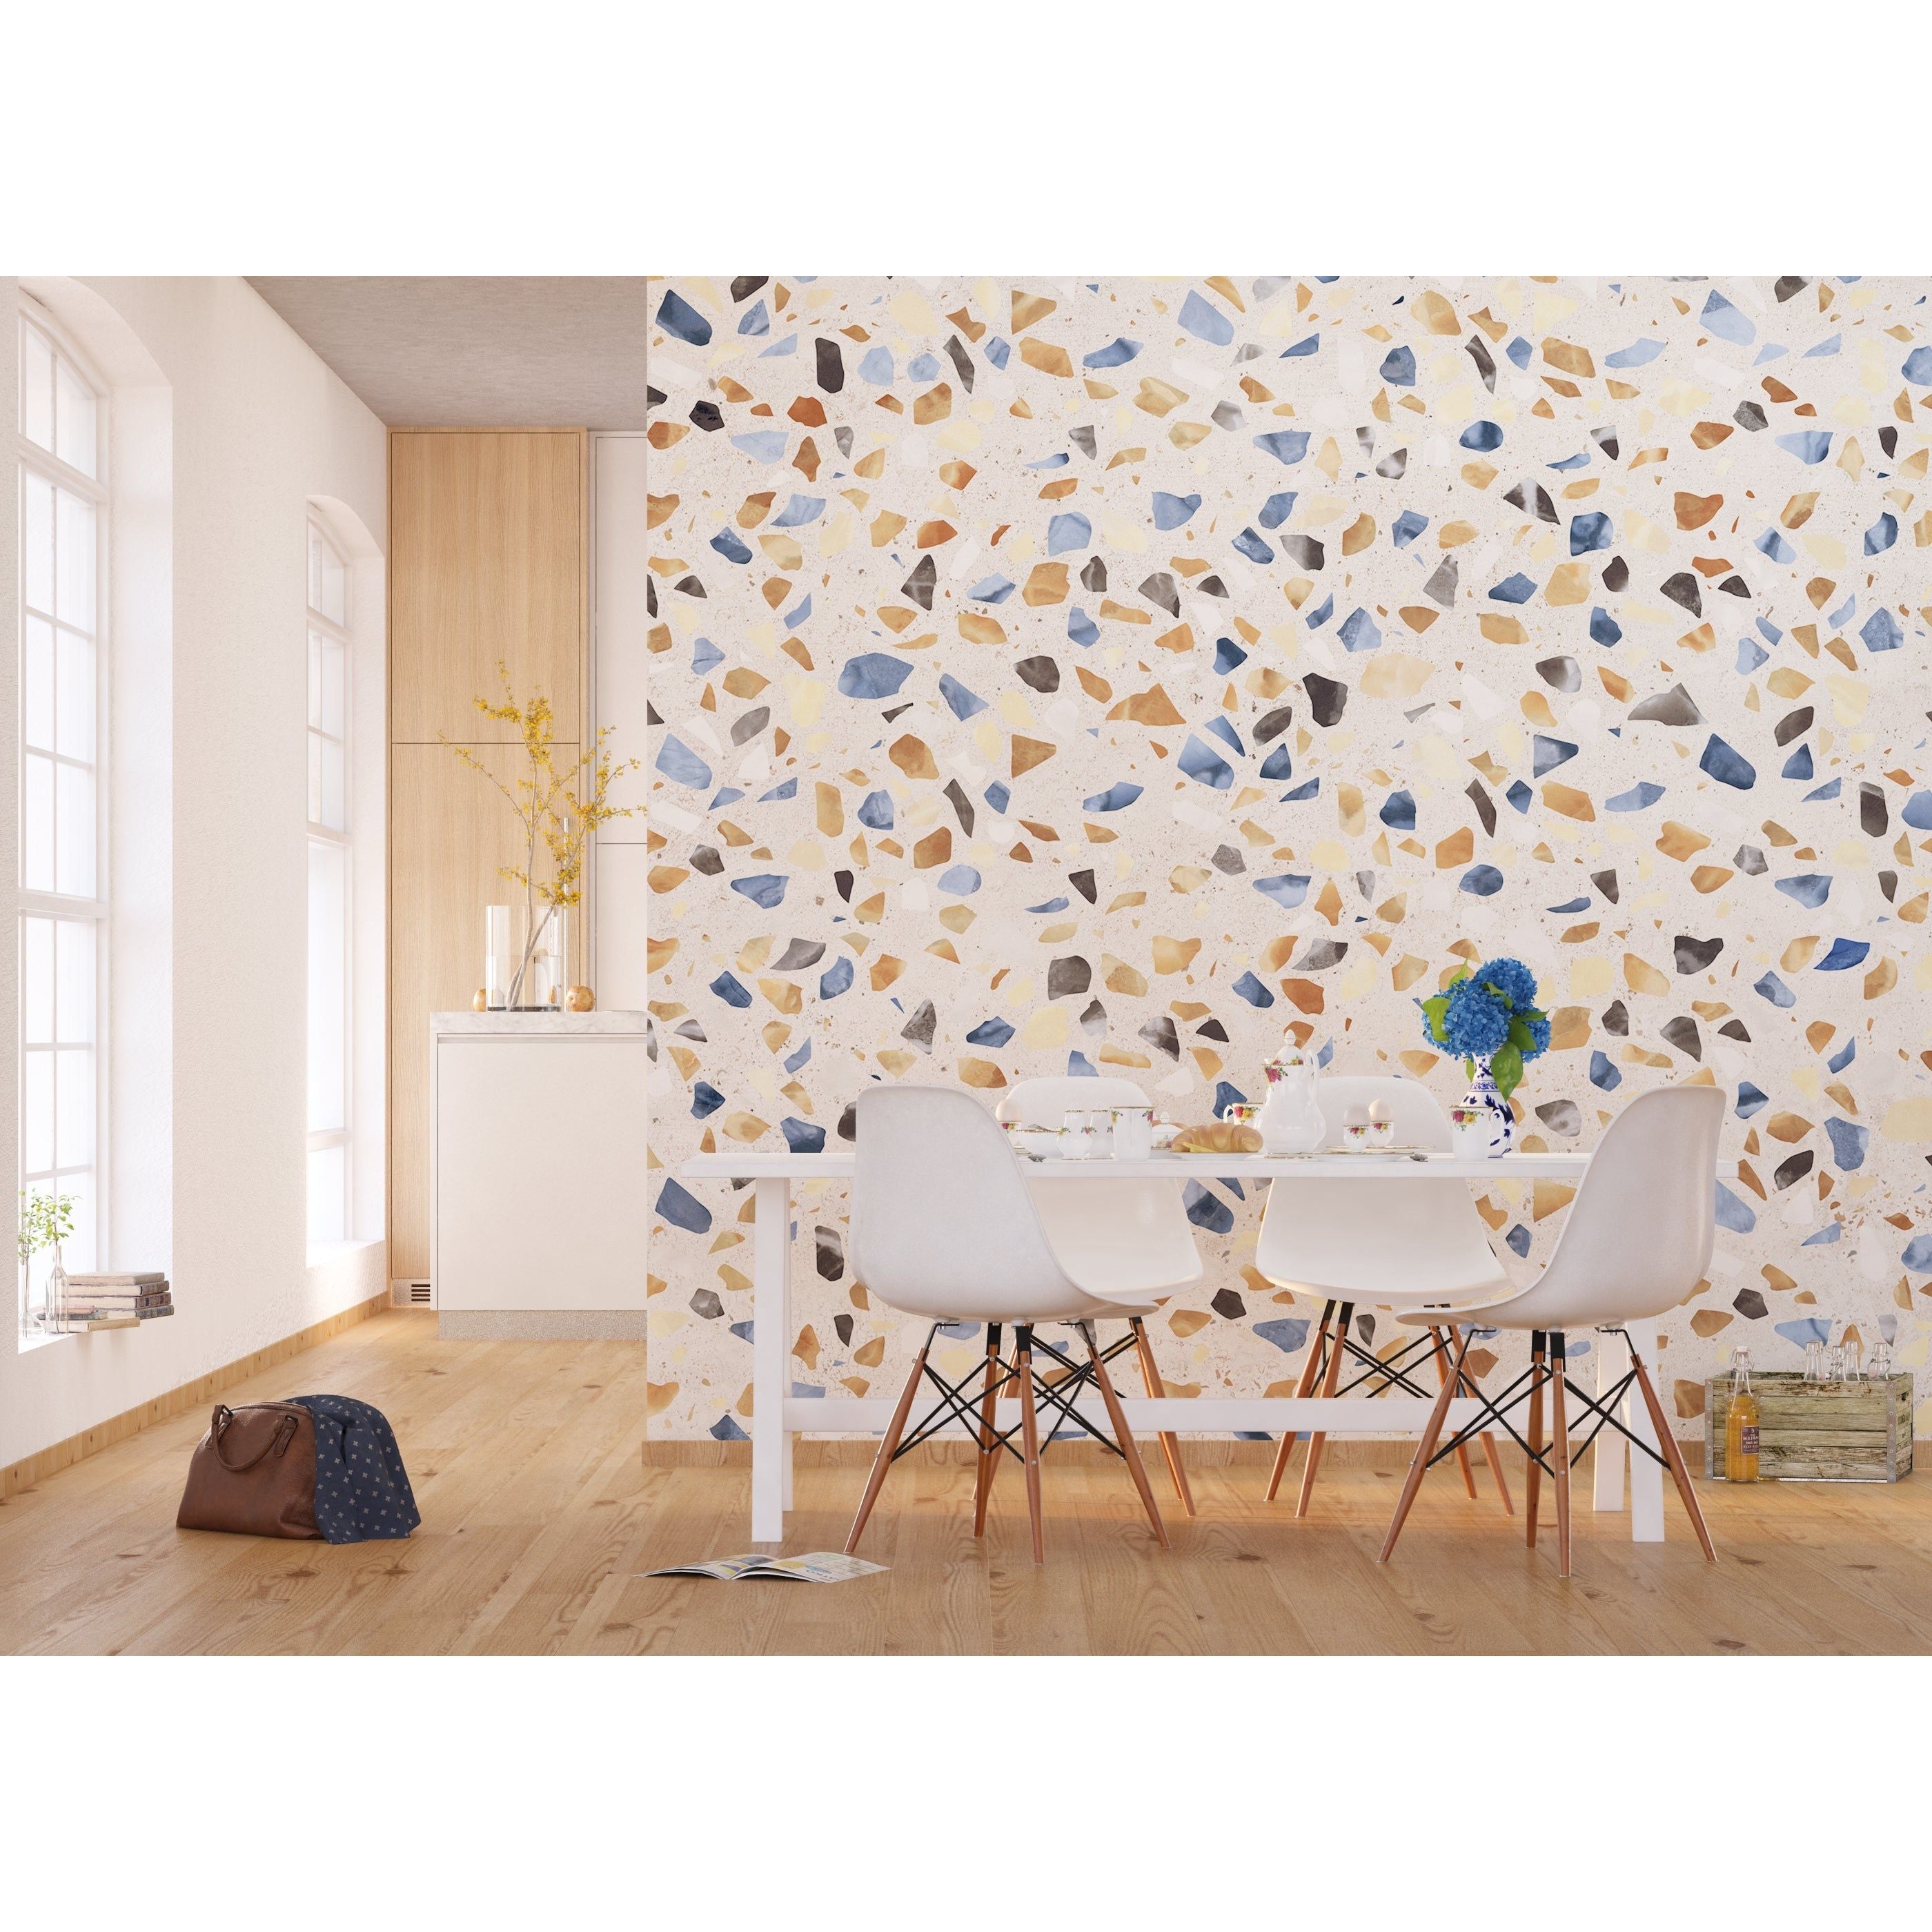 Stunning Marble Stone Wall Murals in a Spectrum of Colors